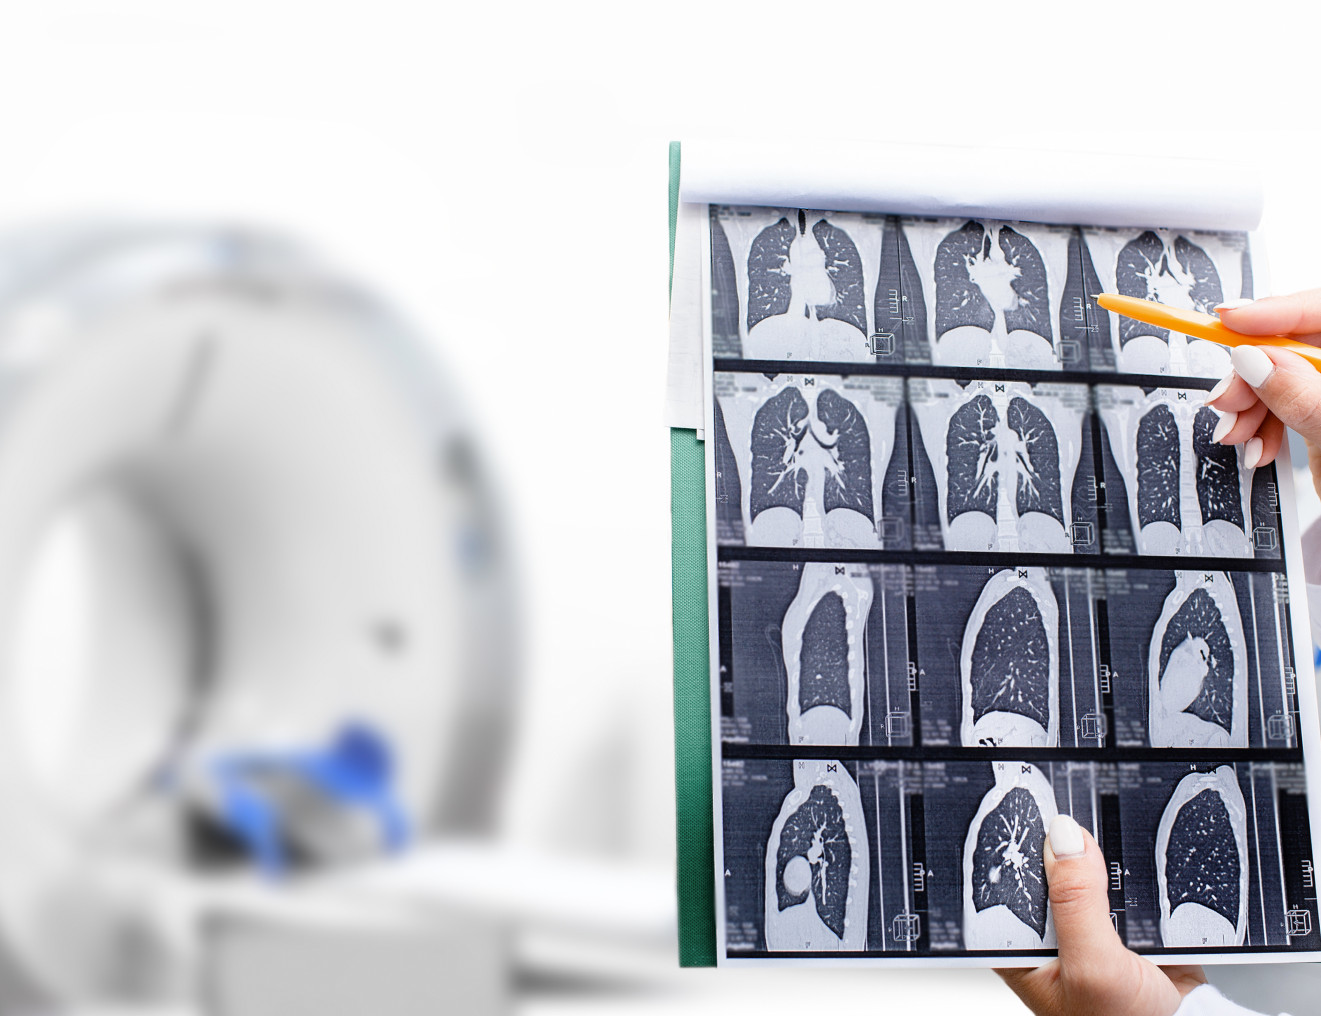 “Lung cancer screening could save 500 lives a year.”